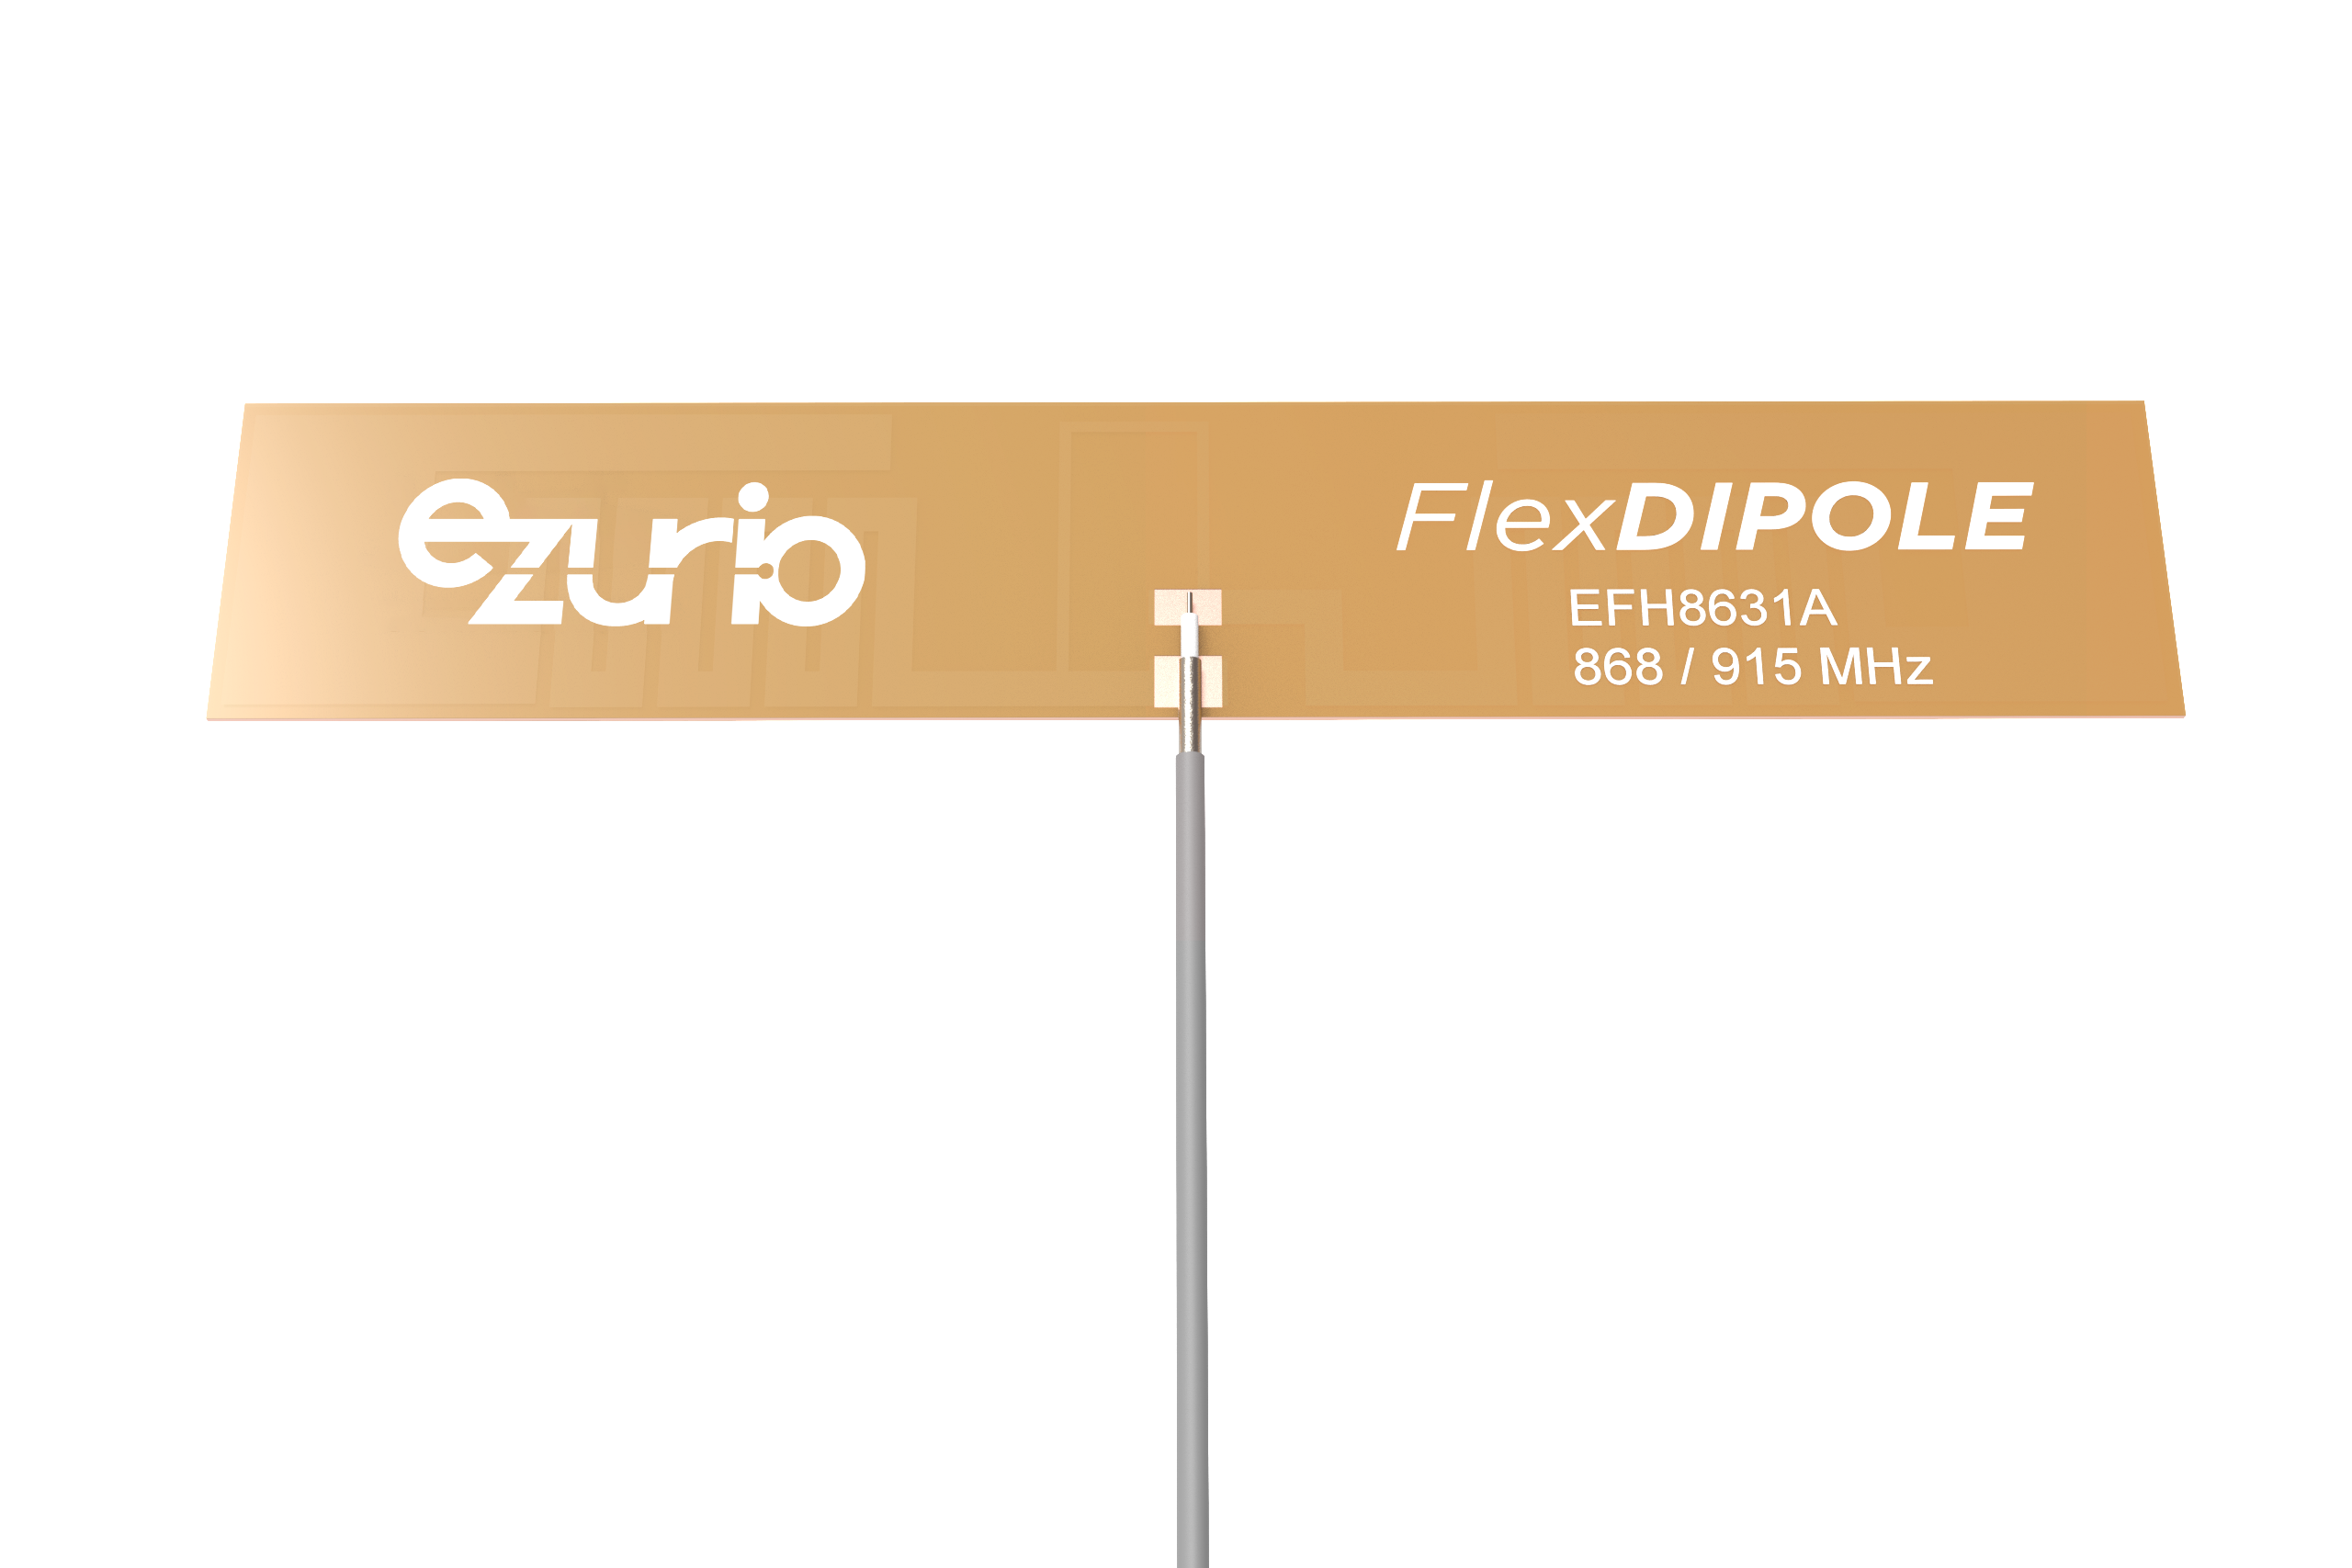 Laird Connectivity Releases Compact Sub-GHz FlexDipole Antenna for Enhanced IoT Connectivity